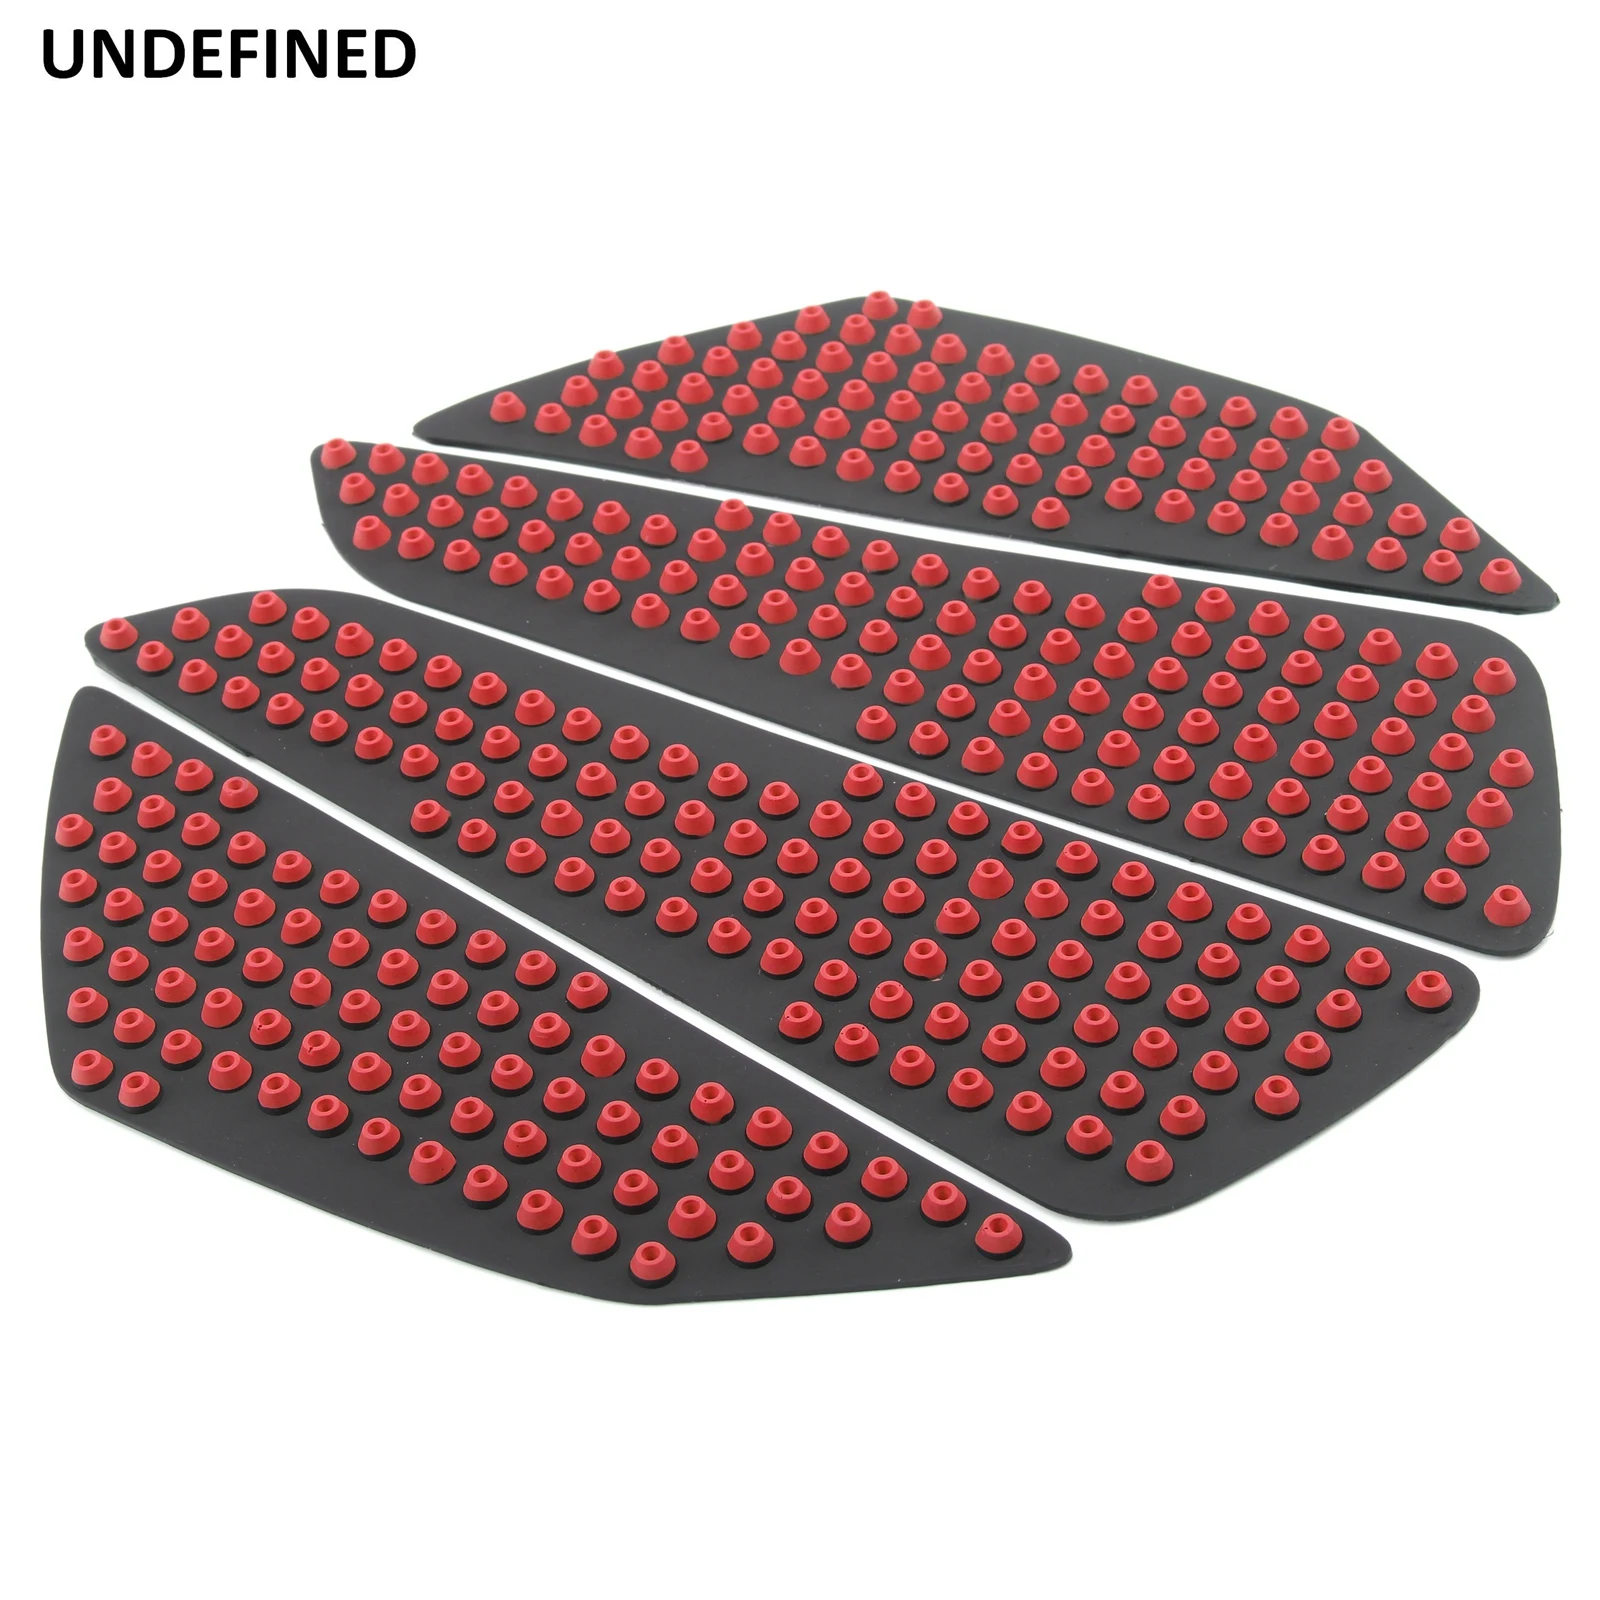 Custom Motorcycle Tank Sticker Anti-slip Adhesive Tank Side Traction Pads Rubbers Pad For Kawasaki Honda CBR600RR 07 Universal sticker10mm x 10mm strong universal guaranteed void sticker 2sheets total 208pcs adhesive warranty fragile seal label